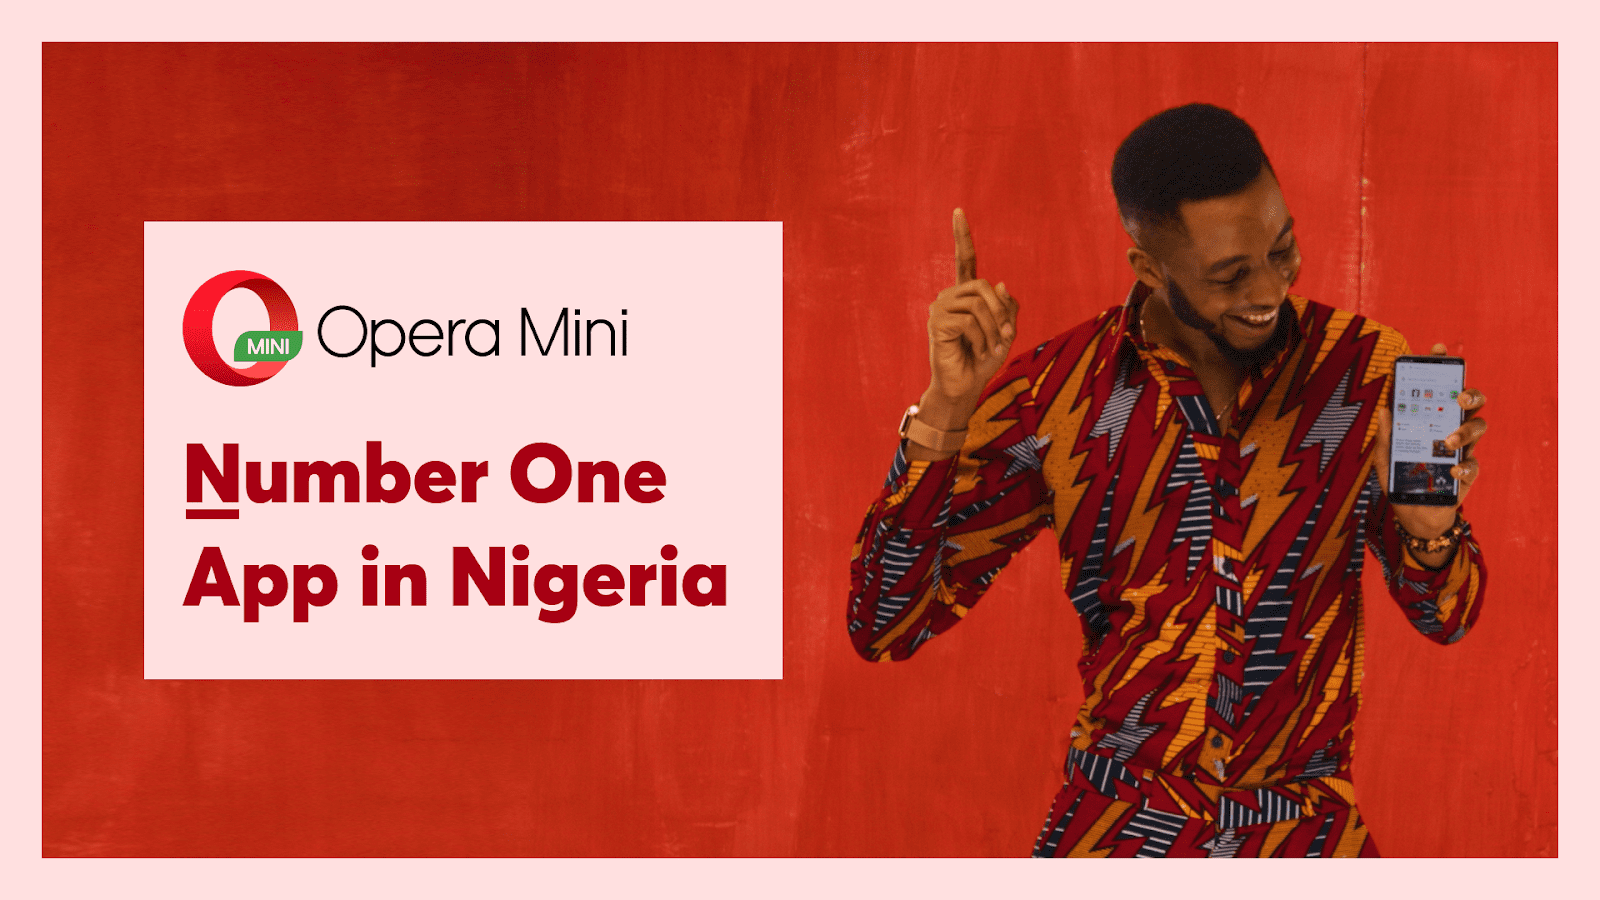 Opera Mini storms Google Play Store becoming №1 downloaded app in Nigeria